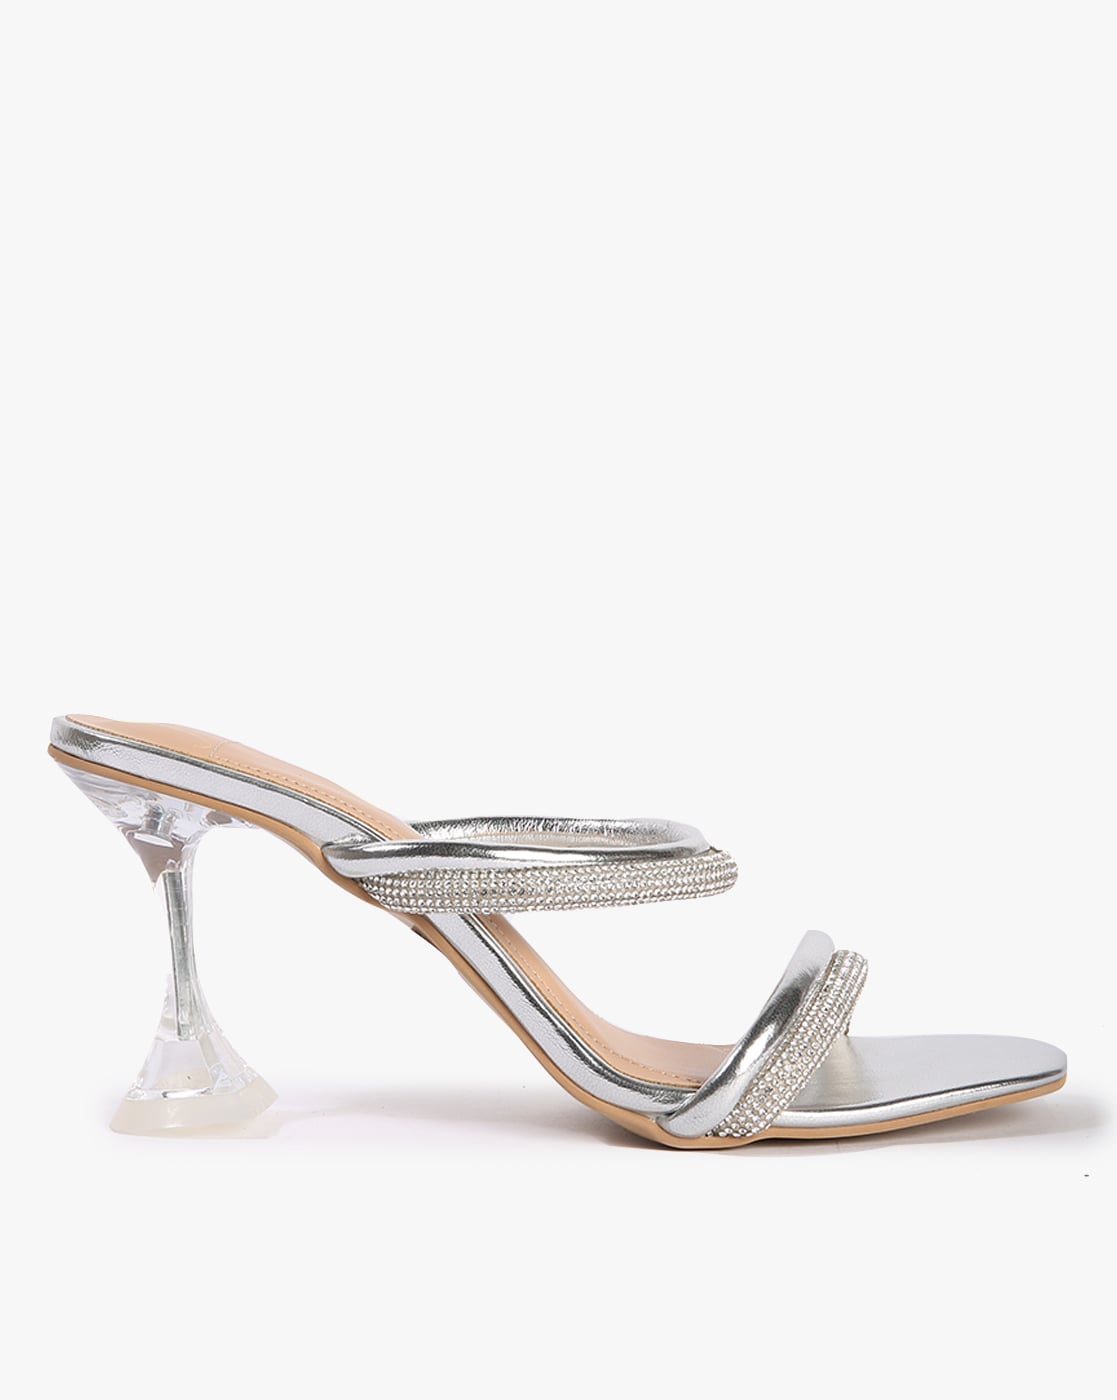 Silver Metallic Flat Sandal with Ankle Strap | Metallic sandals flat, Silver  sparkly shoes, Bridesmaid shoes